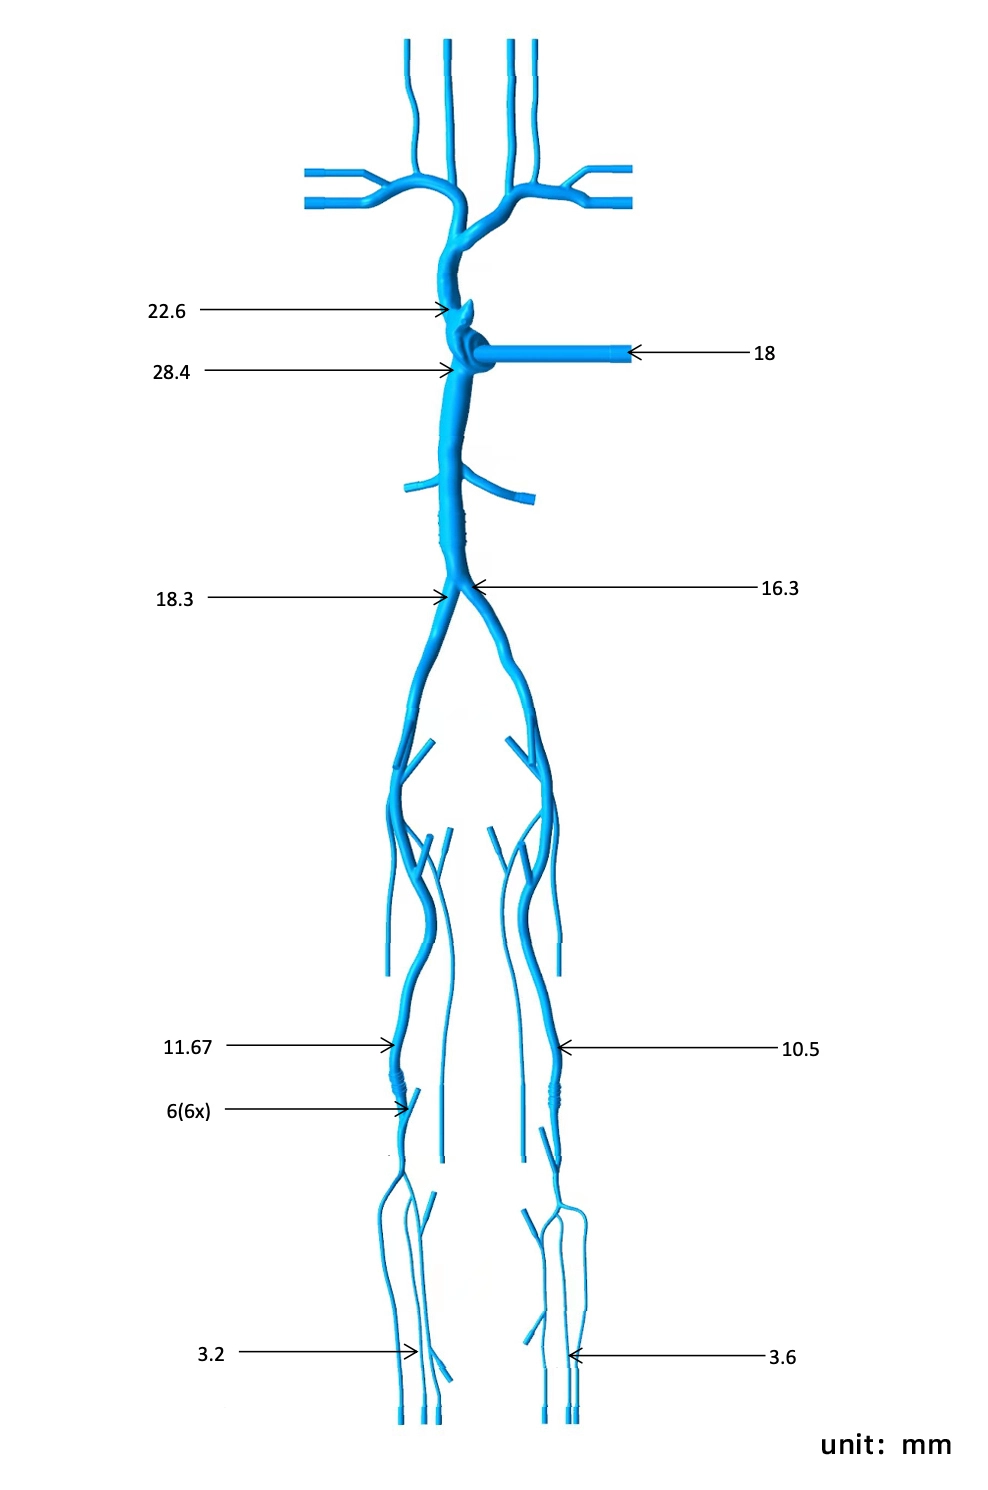 Drawing of Superior And Inferior Vena Cava-Lower Extremity Vein Simulation Model